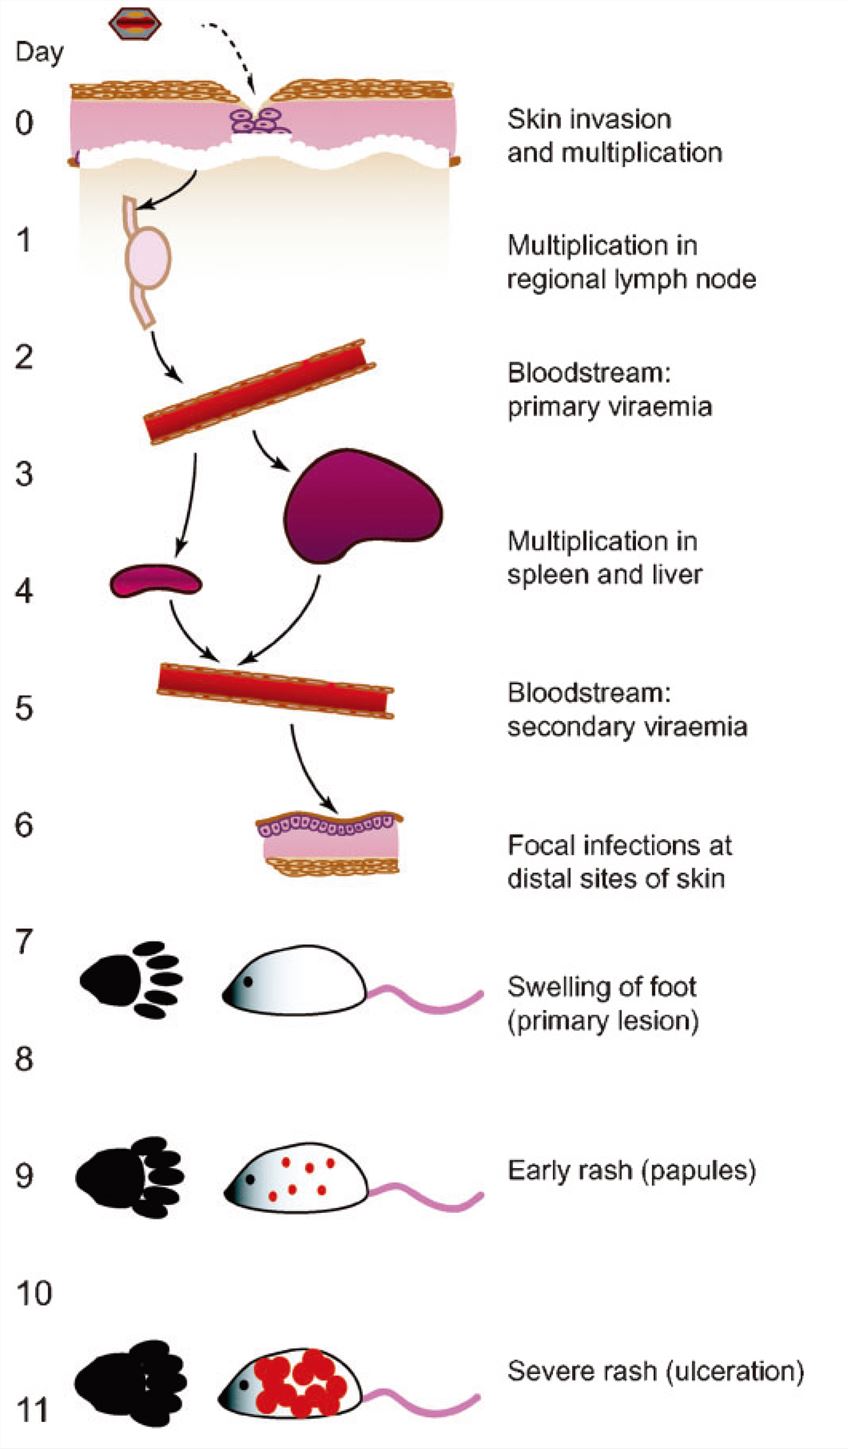 Sequence of events during the course of ECTV infection